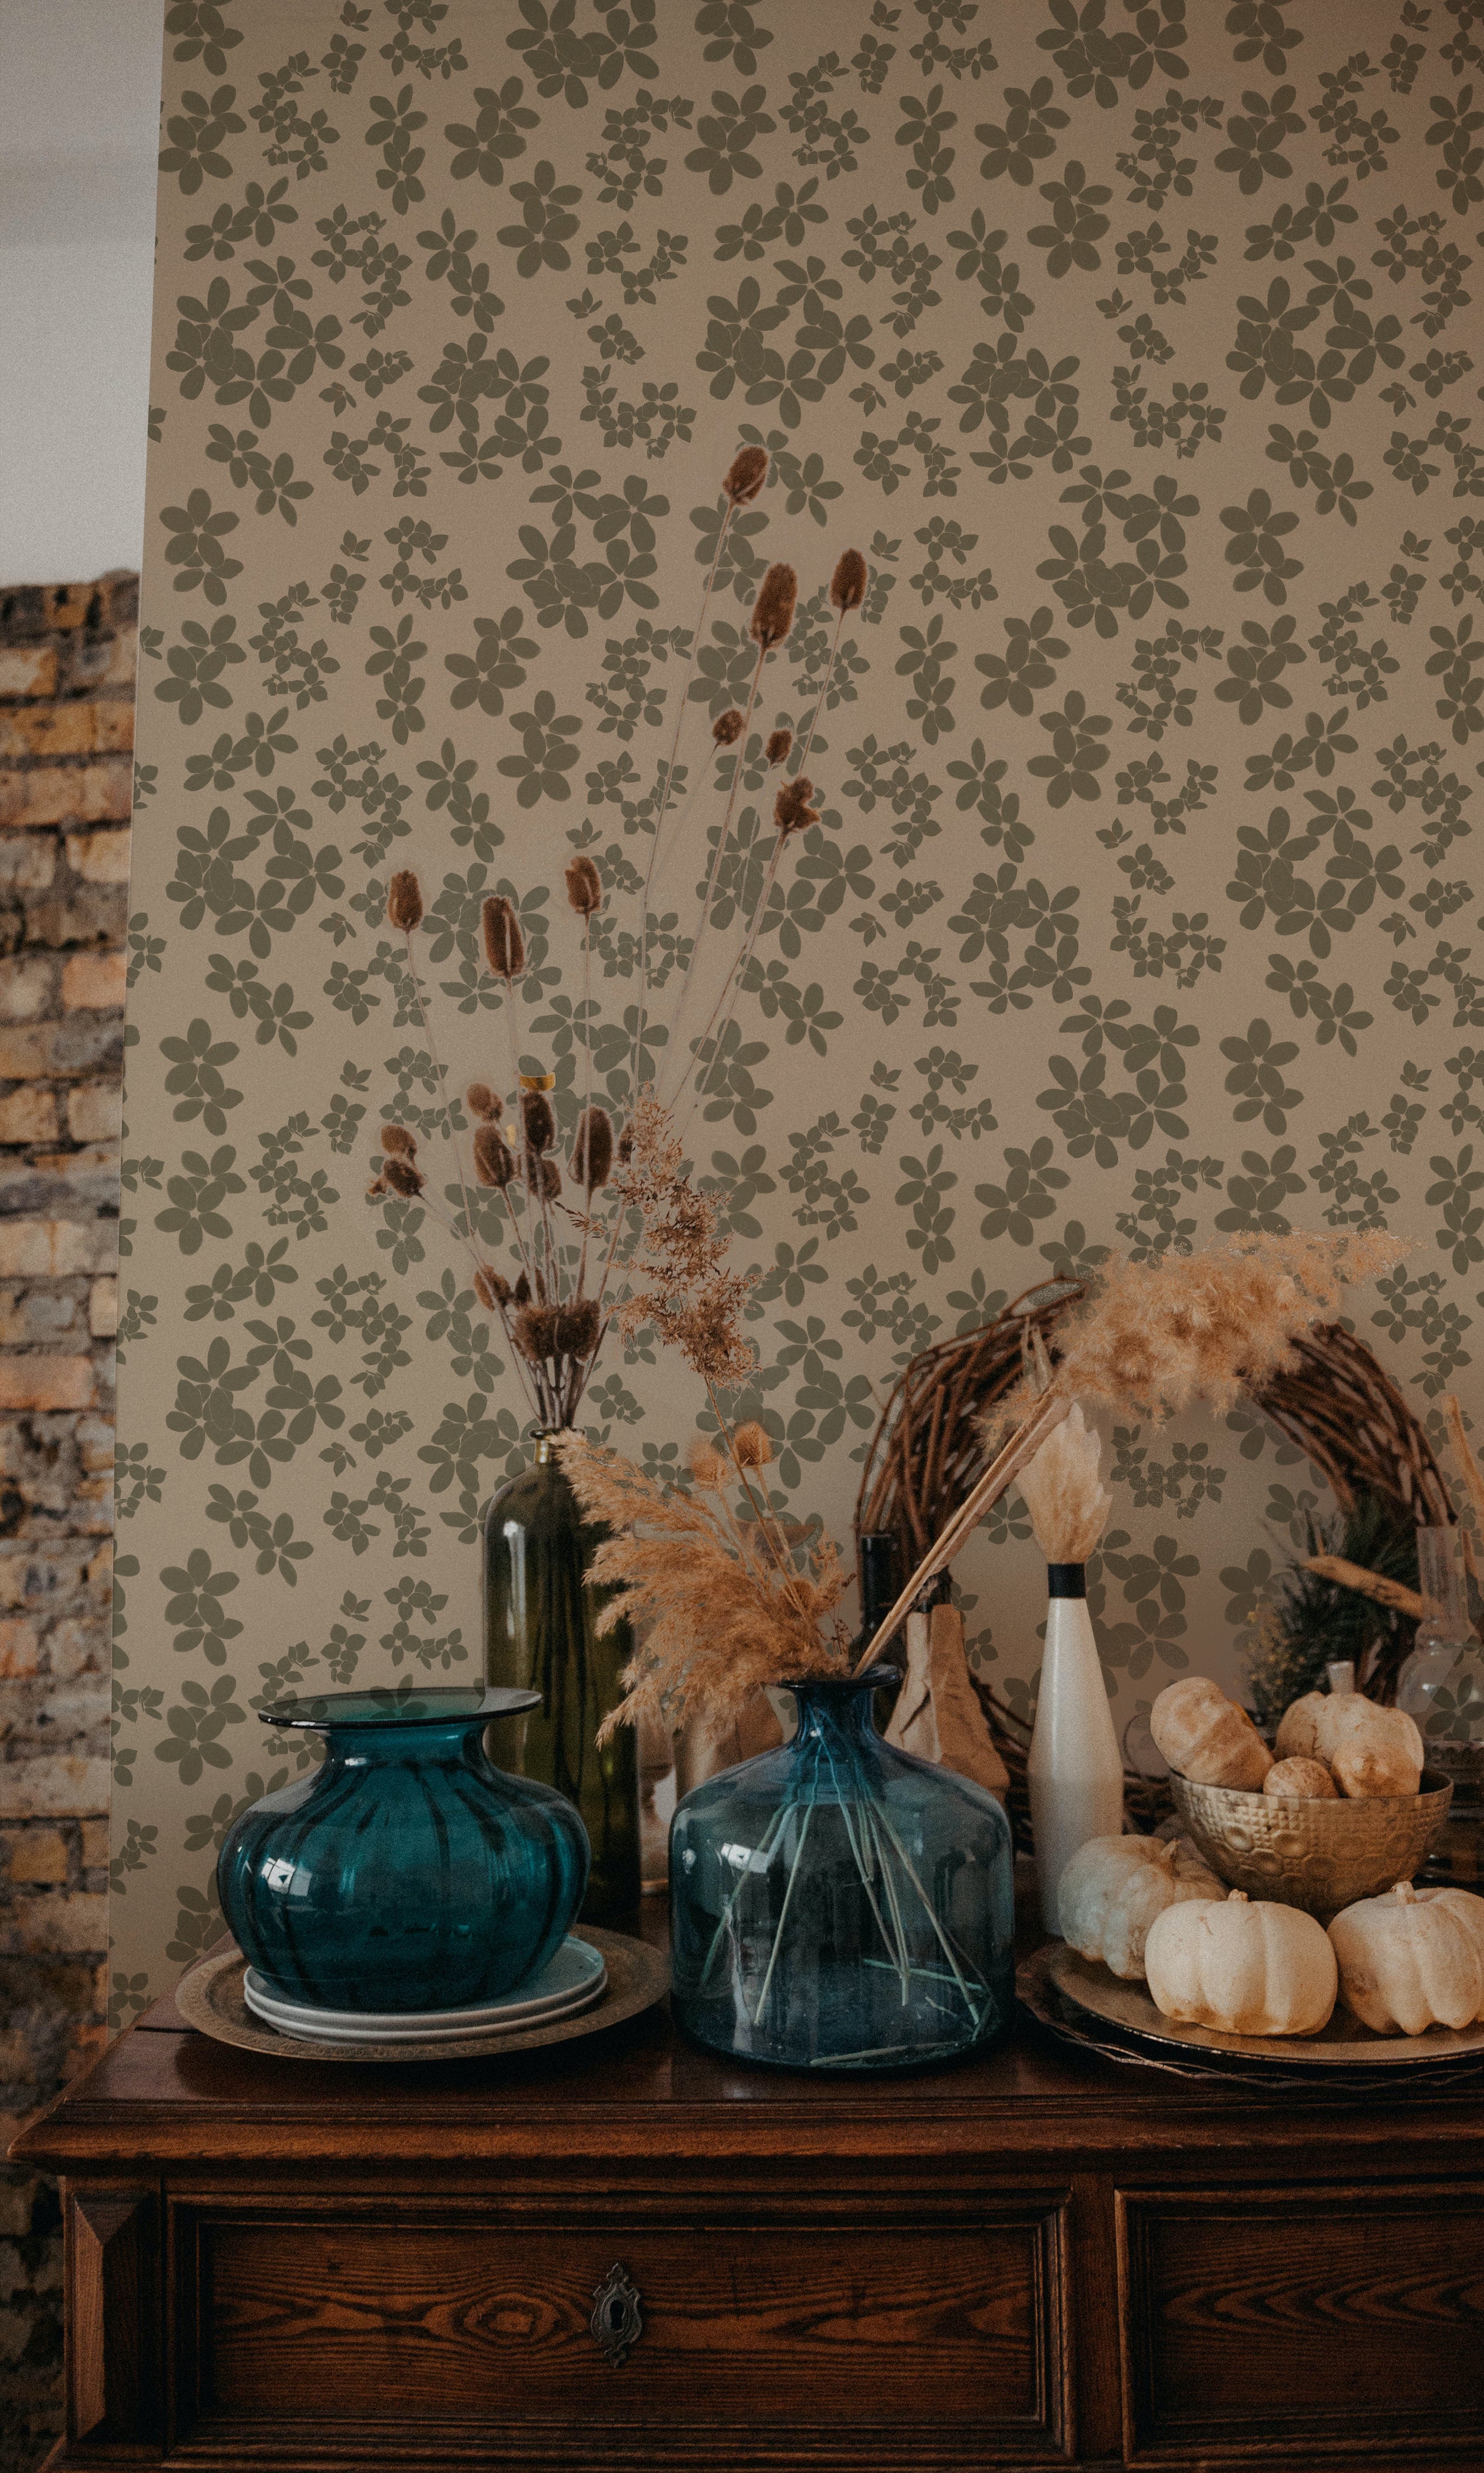 A warm and inviting room decor accentuated with the Little Flowers Wallpaper. The room features a vintage wooden dresser adorned with autumn-themed decorations including dried flowers, pumpkins, and colorful vases. The floral wallpaper adds a soft, botanical backdrop that complements the rustic and seasonal elements of the room's decor.